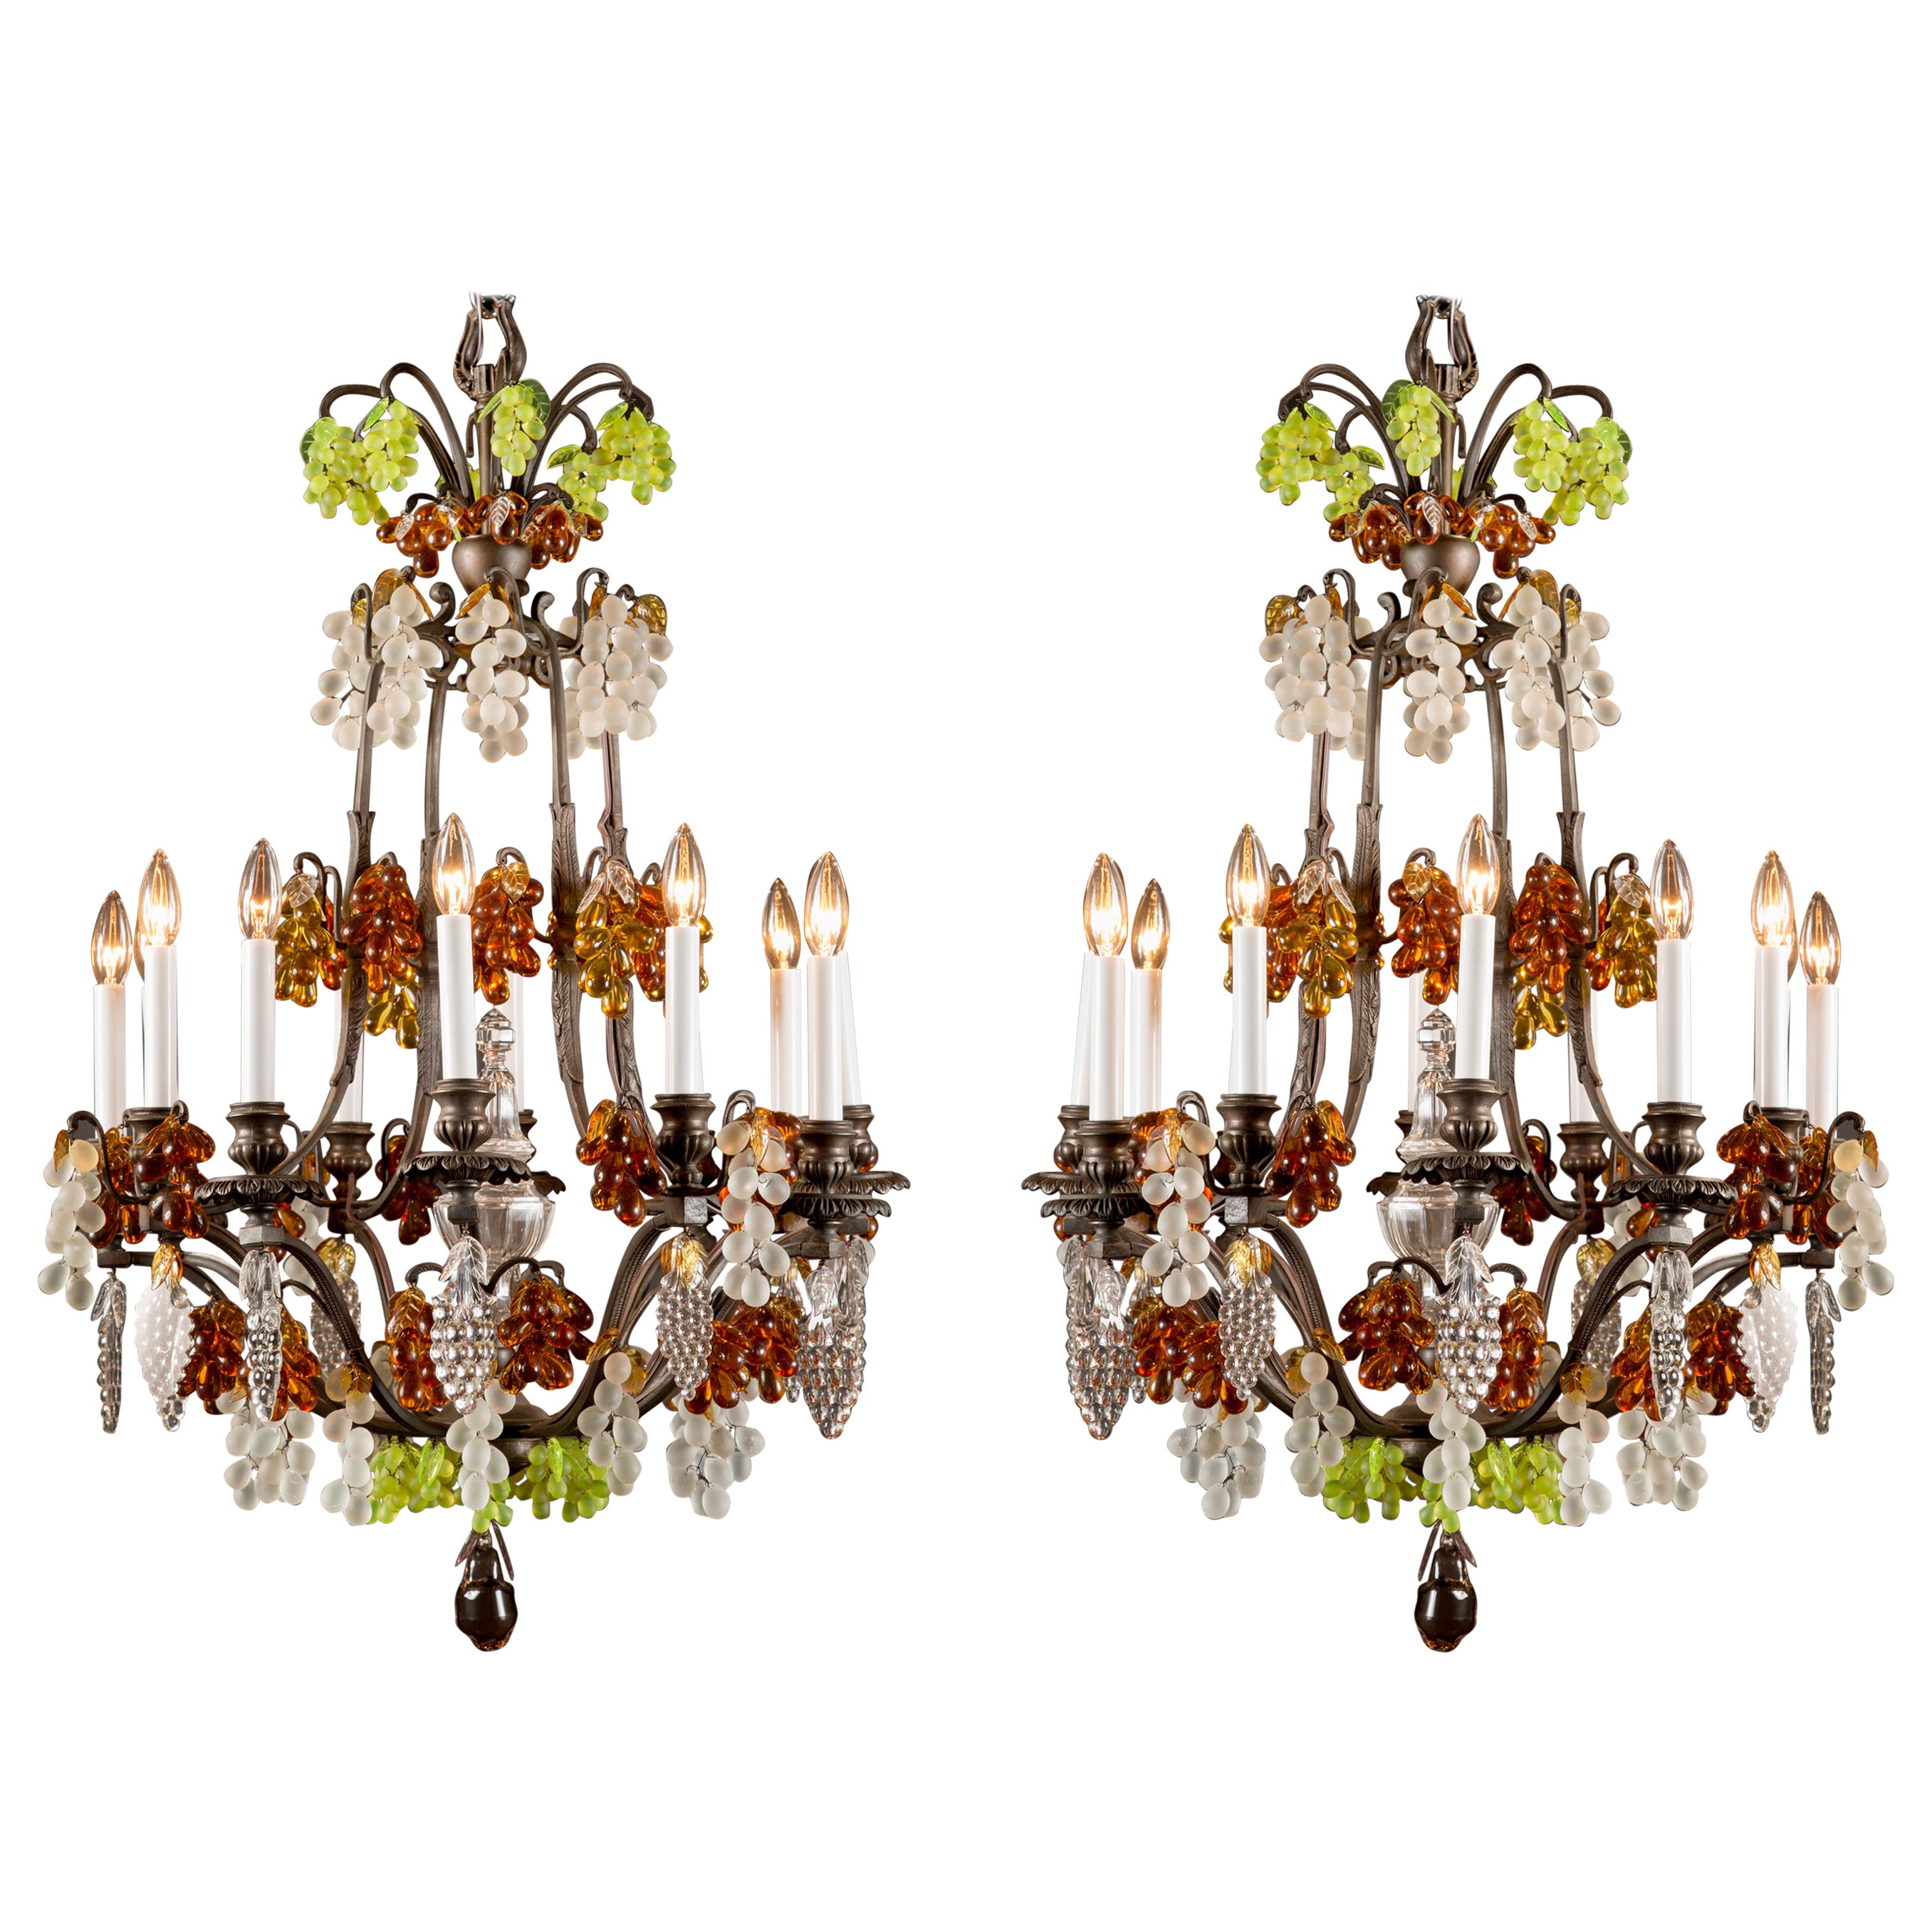 Pair of French Louis XV Patinated Bronze & Crystal Chandeliers, 19th Century